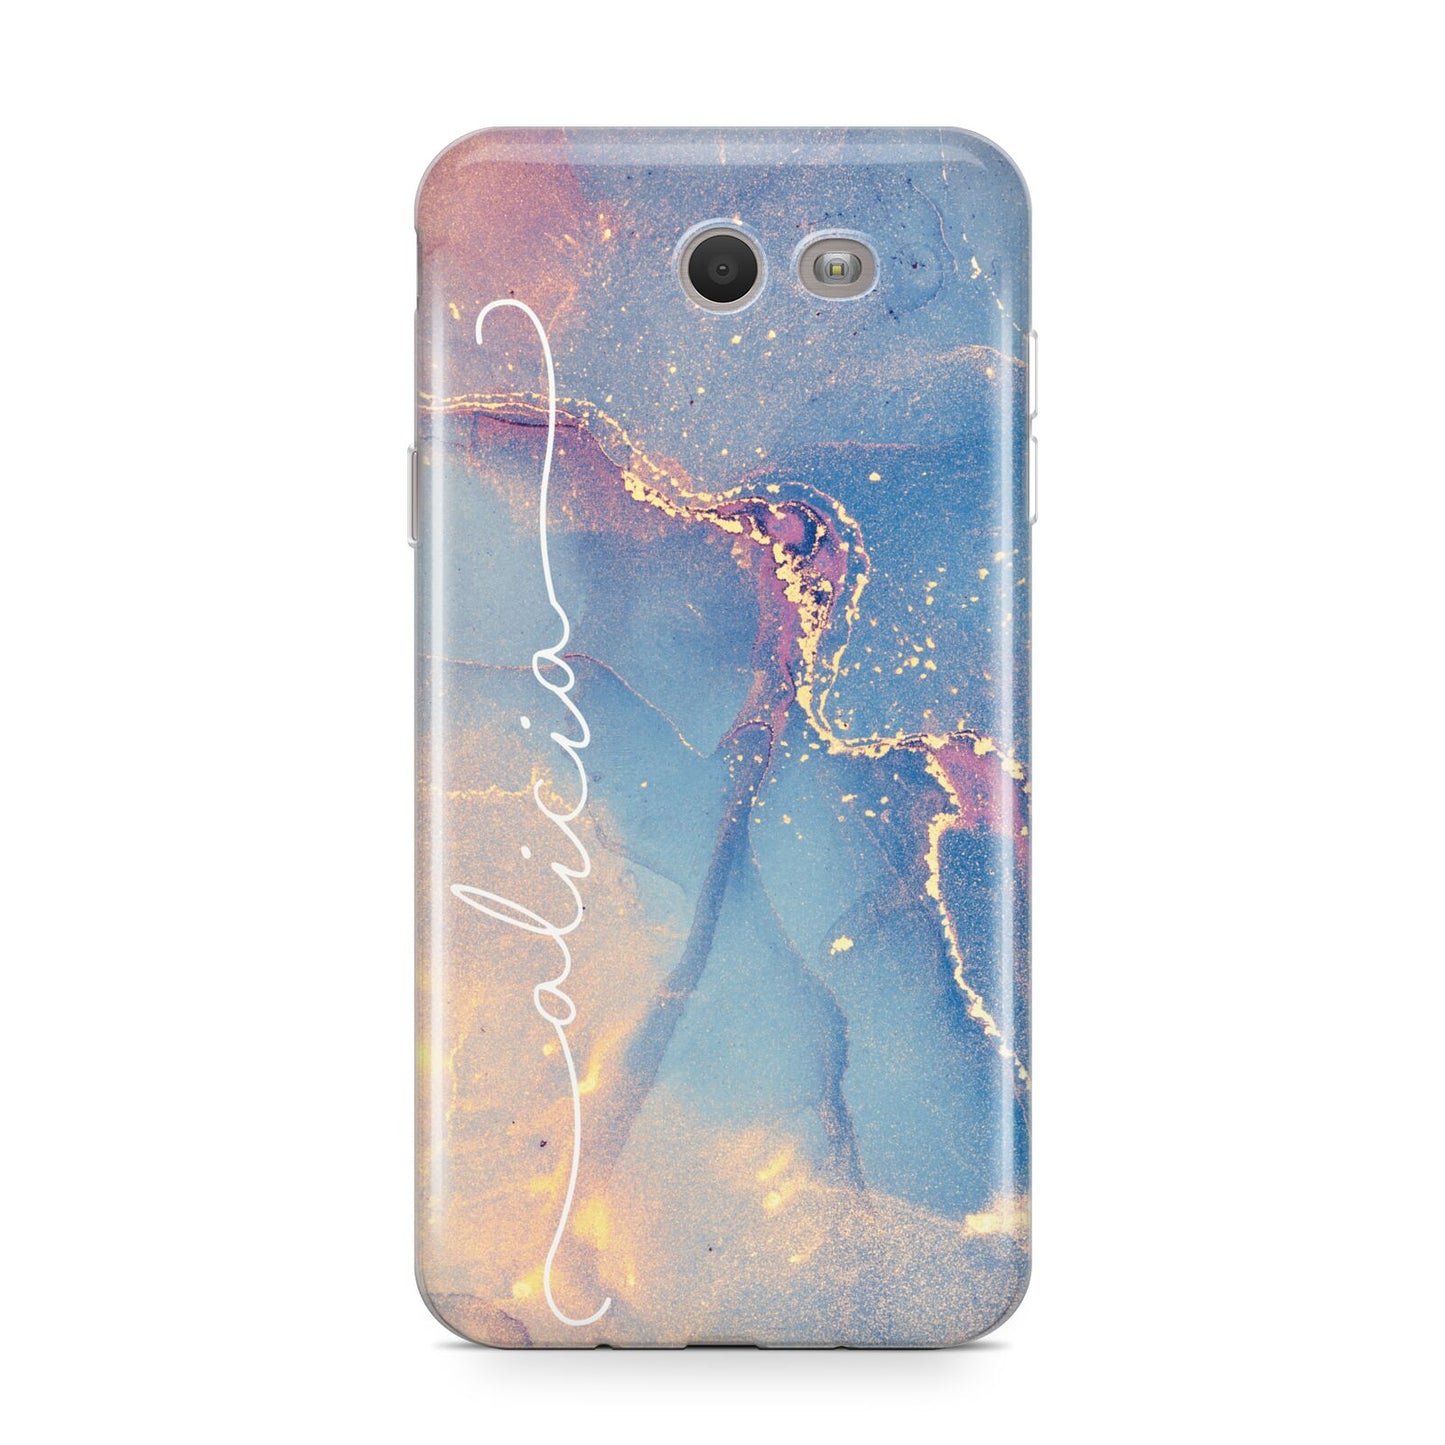 Blue and Pink Marble Samsung Galaxy J7 2017 Case